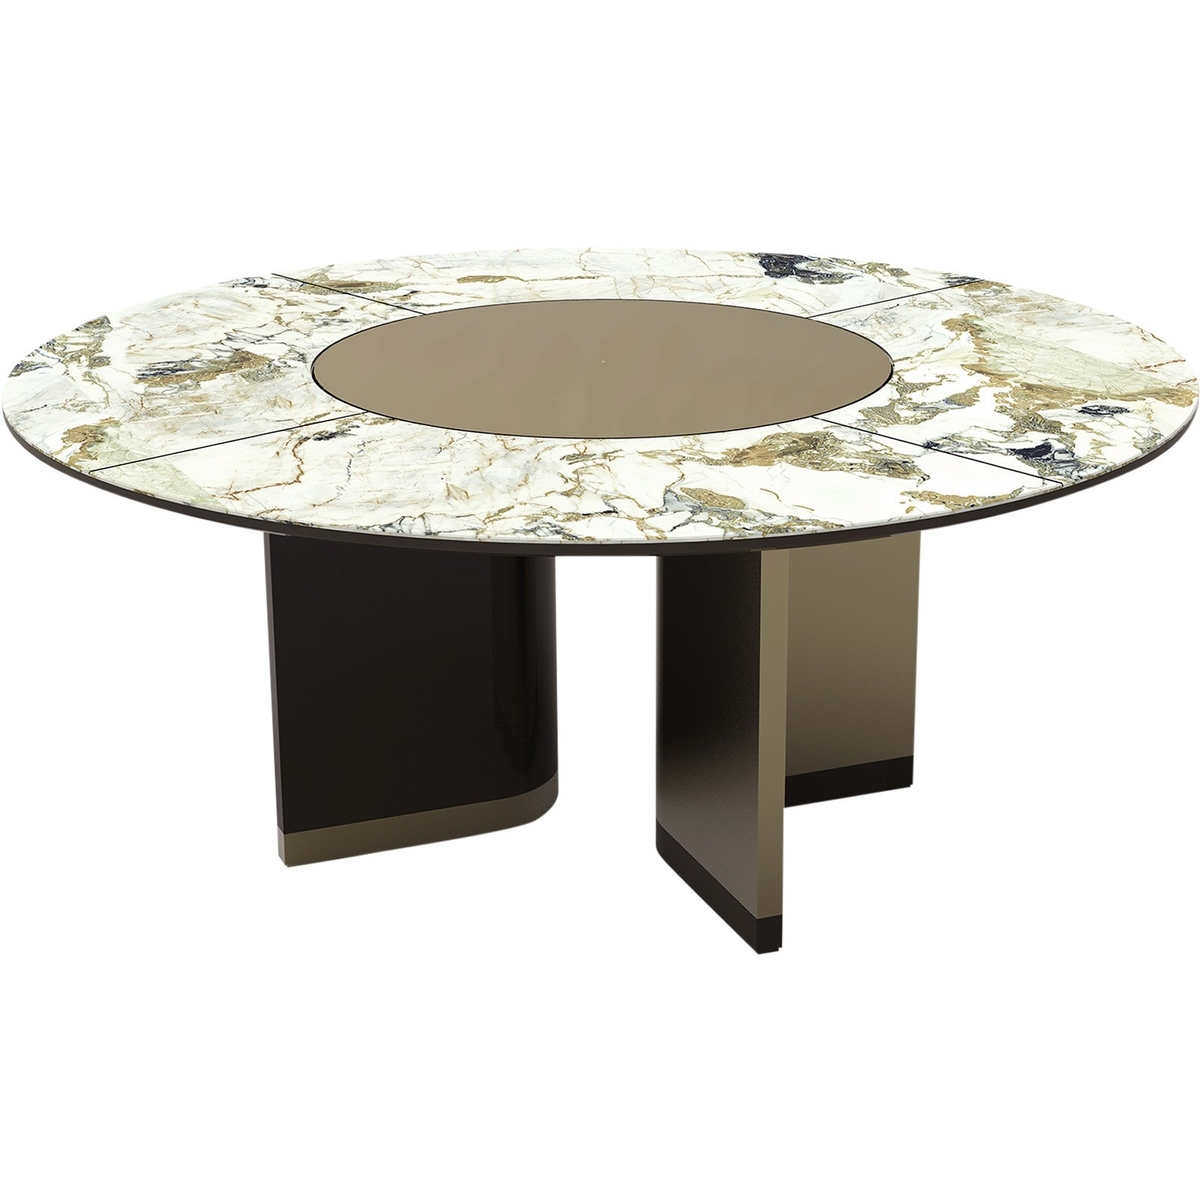 Ikat Round Table